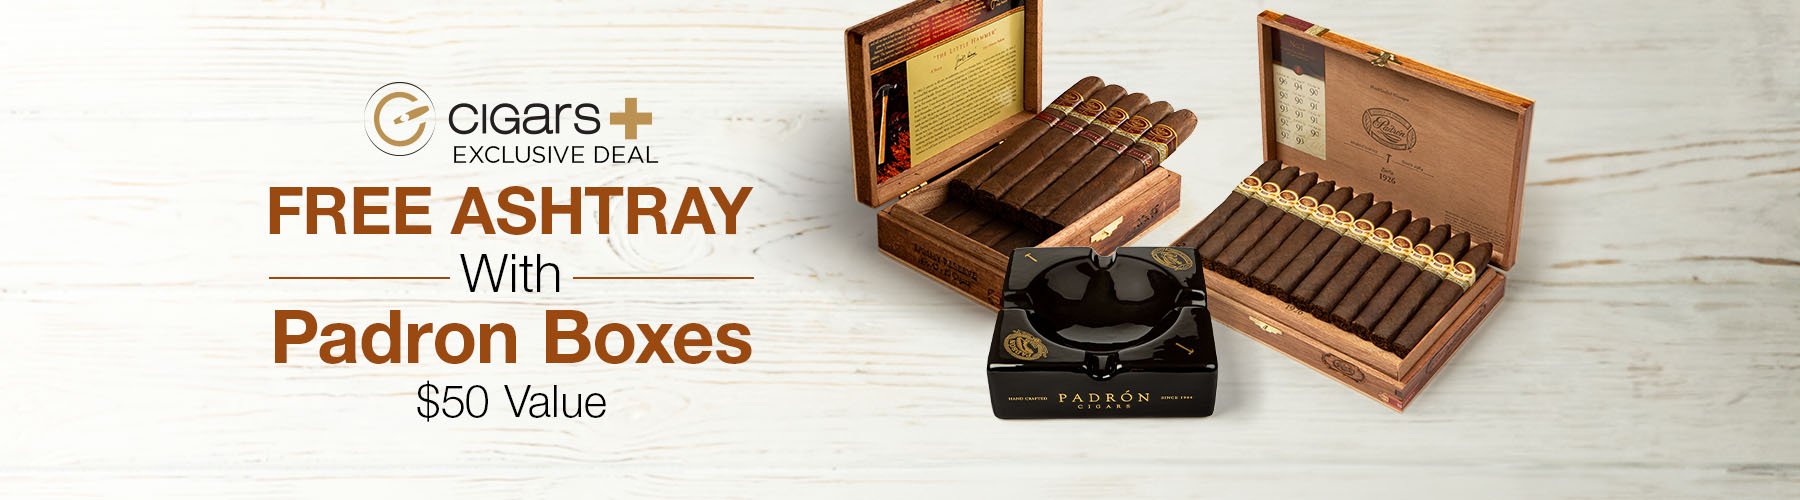 Free ashtray with Padron boxes! $50.00 value